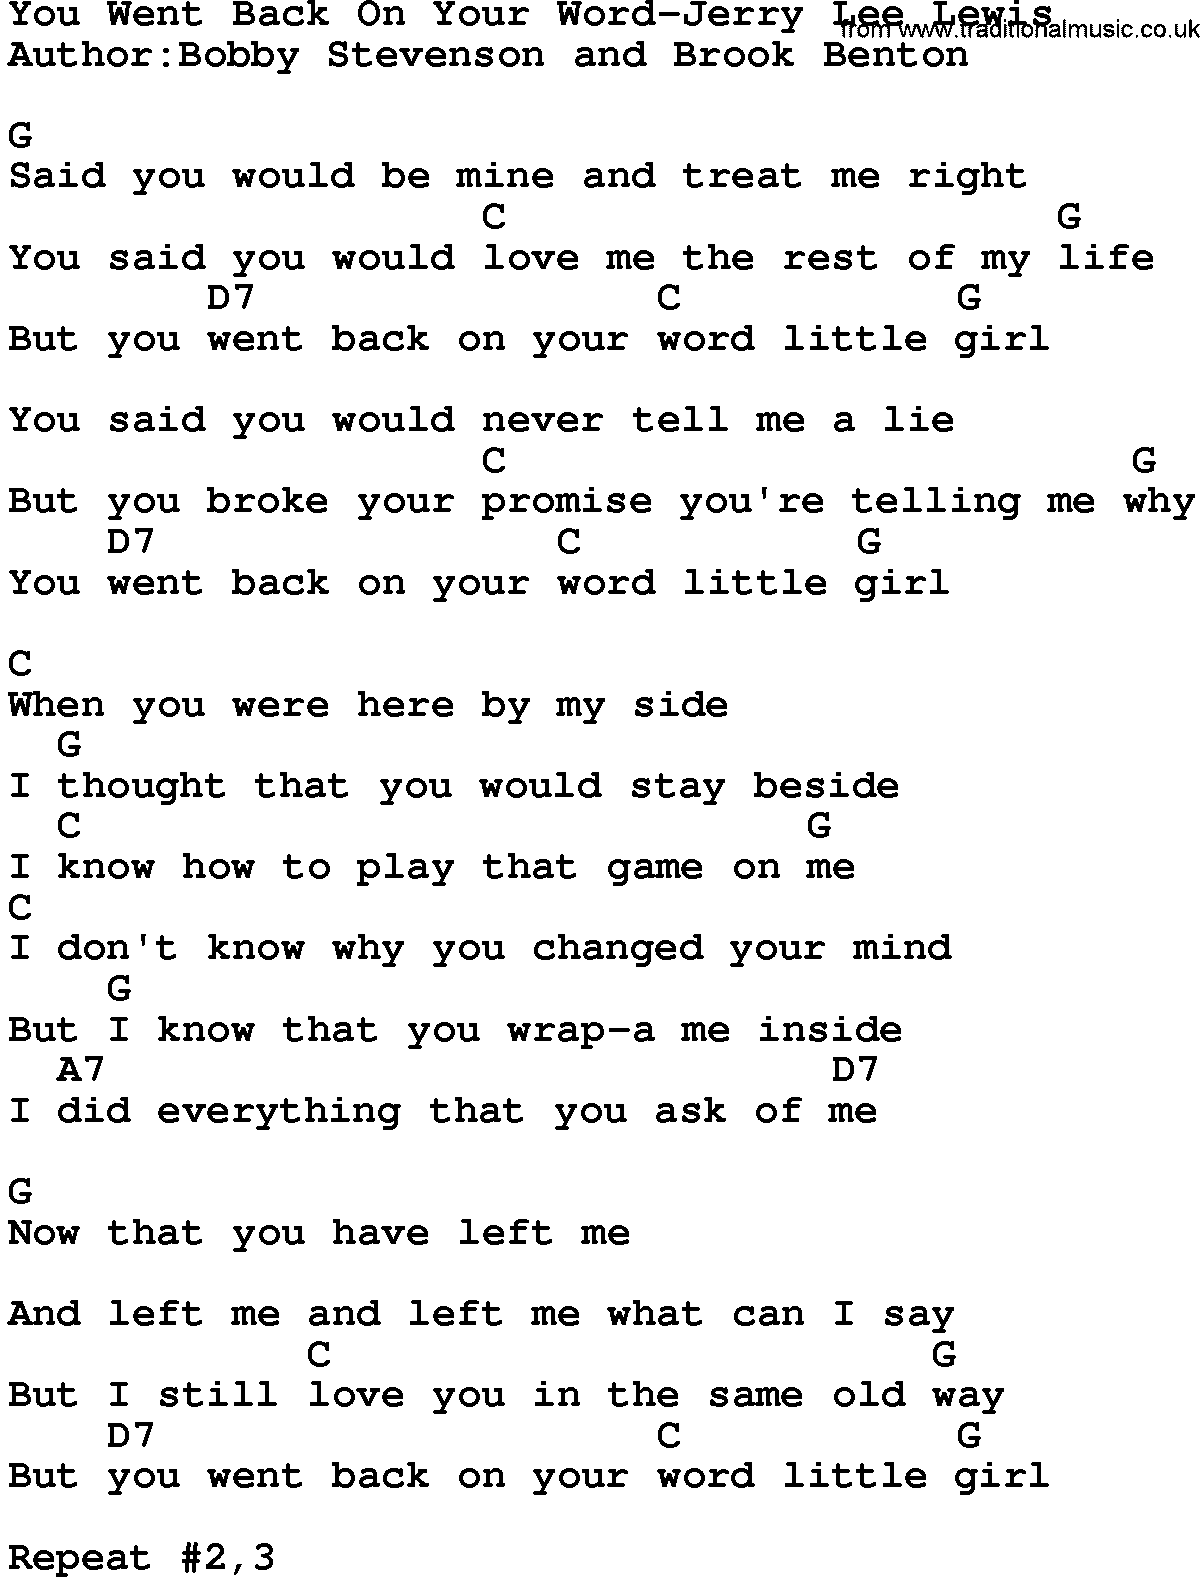 Country music song: You Went Back On Your Word-Jerry Lee Lewis lyrics and chords